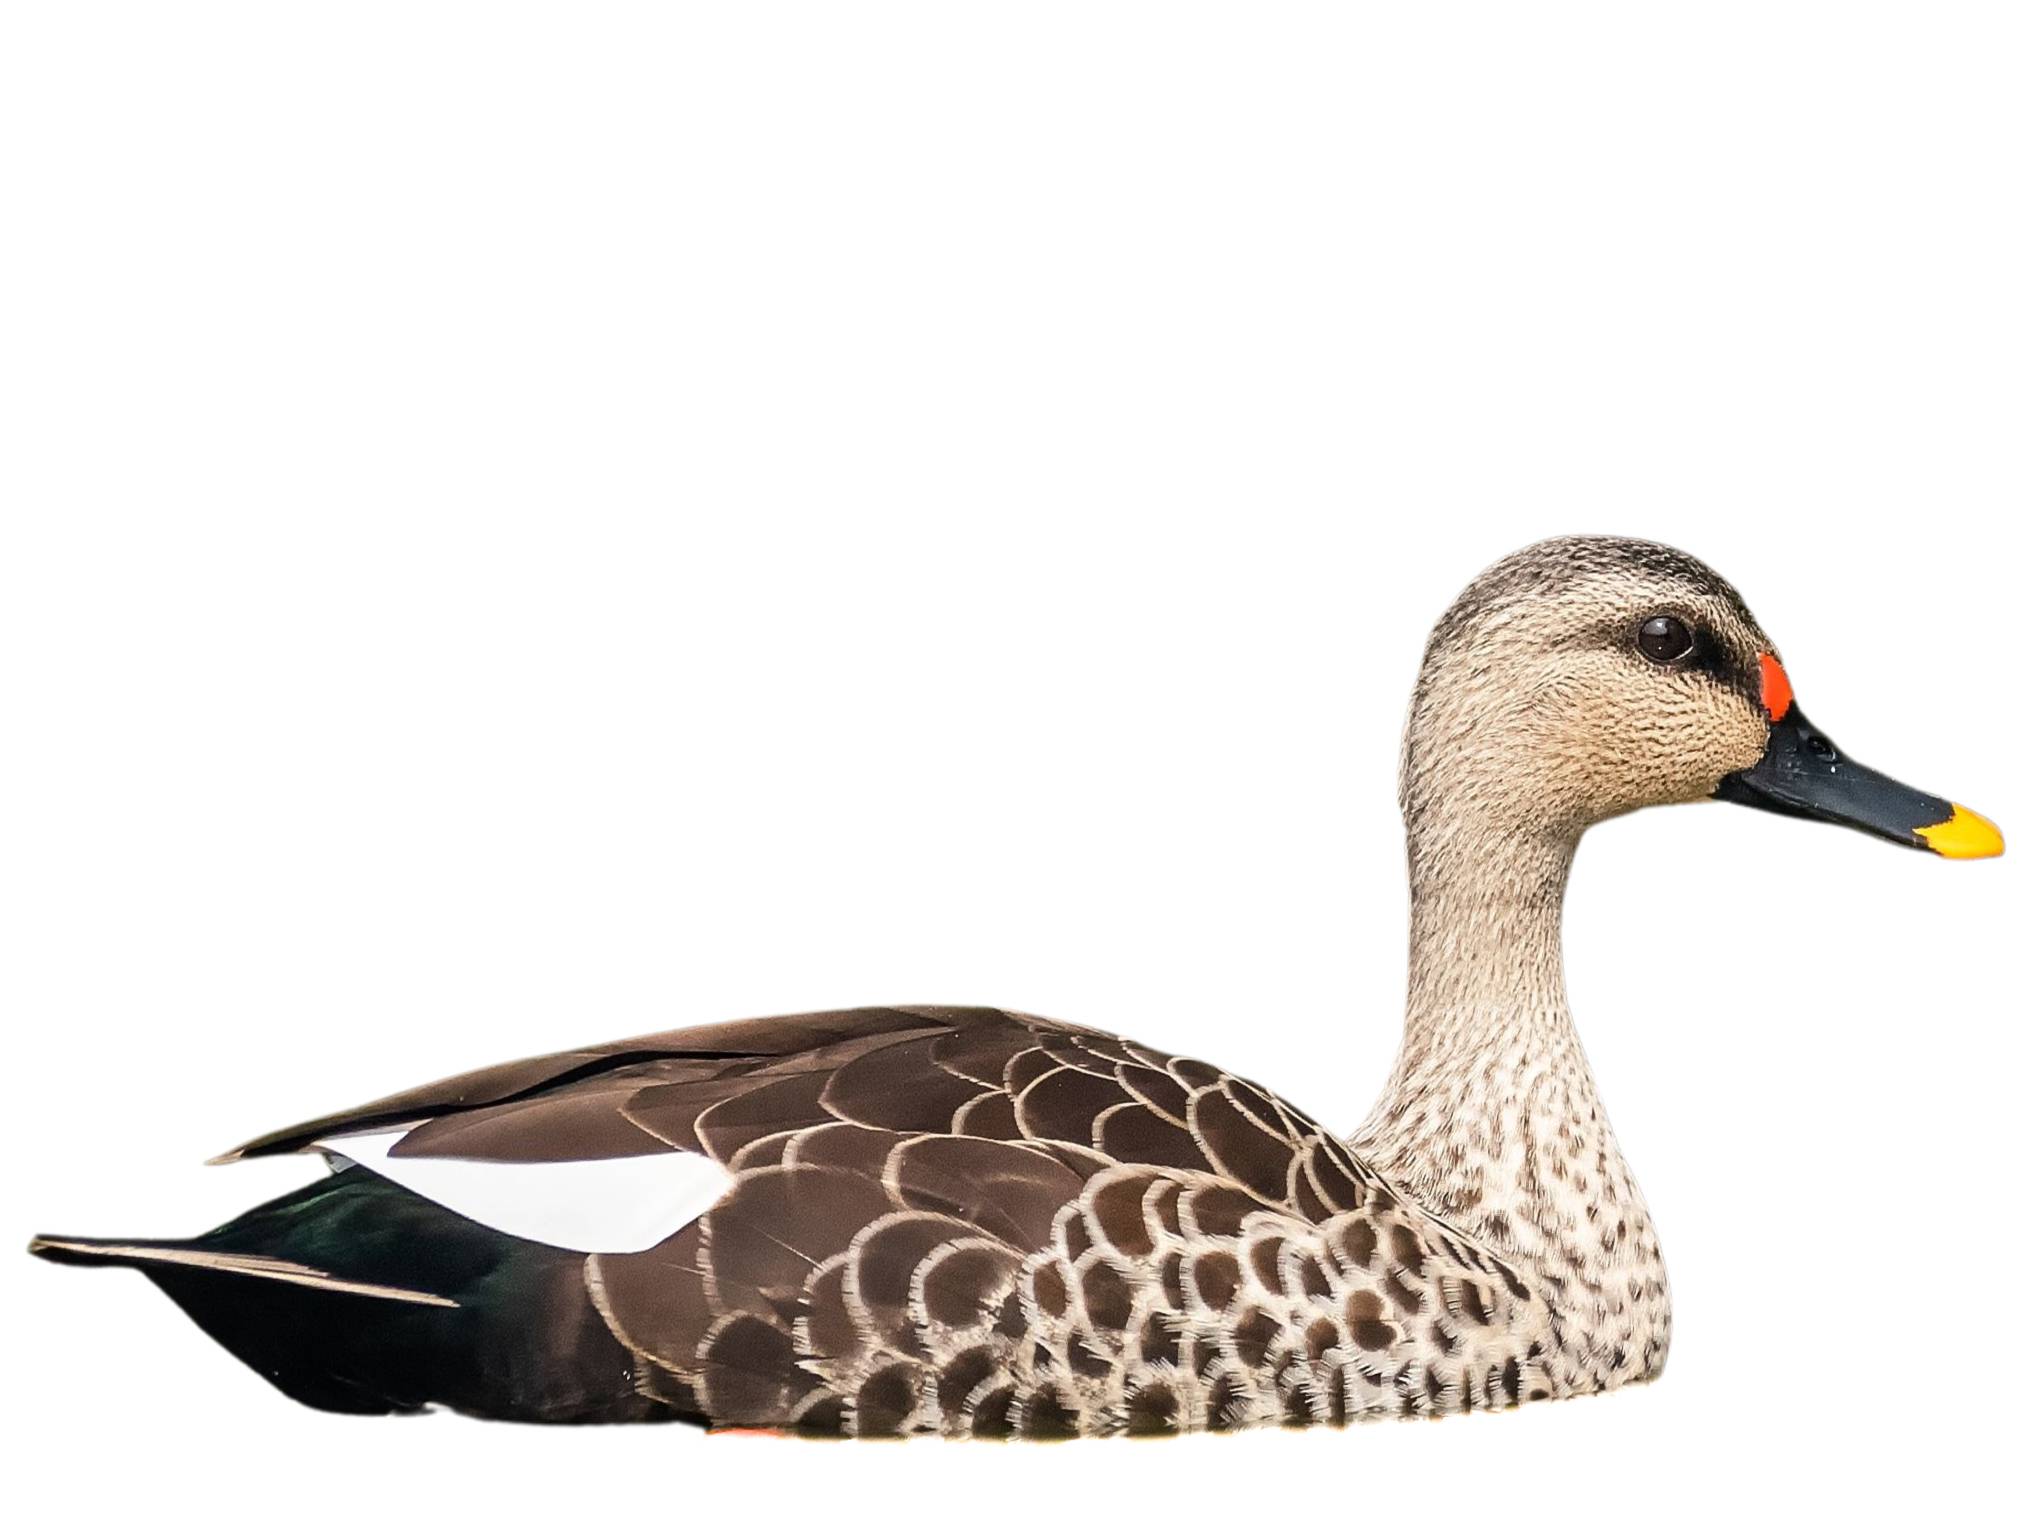 A photo of a Indian Spot-billed Duck (Anas poecilorhyncha)